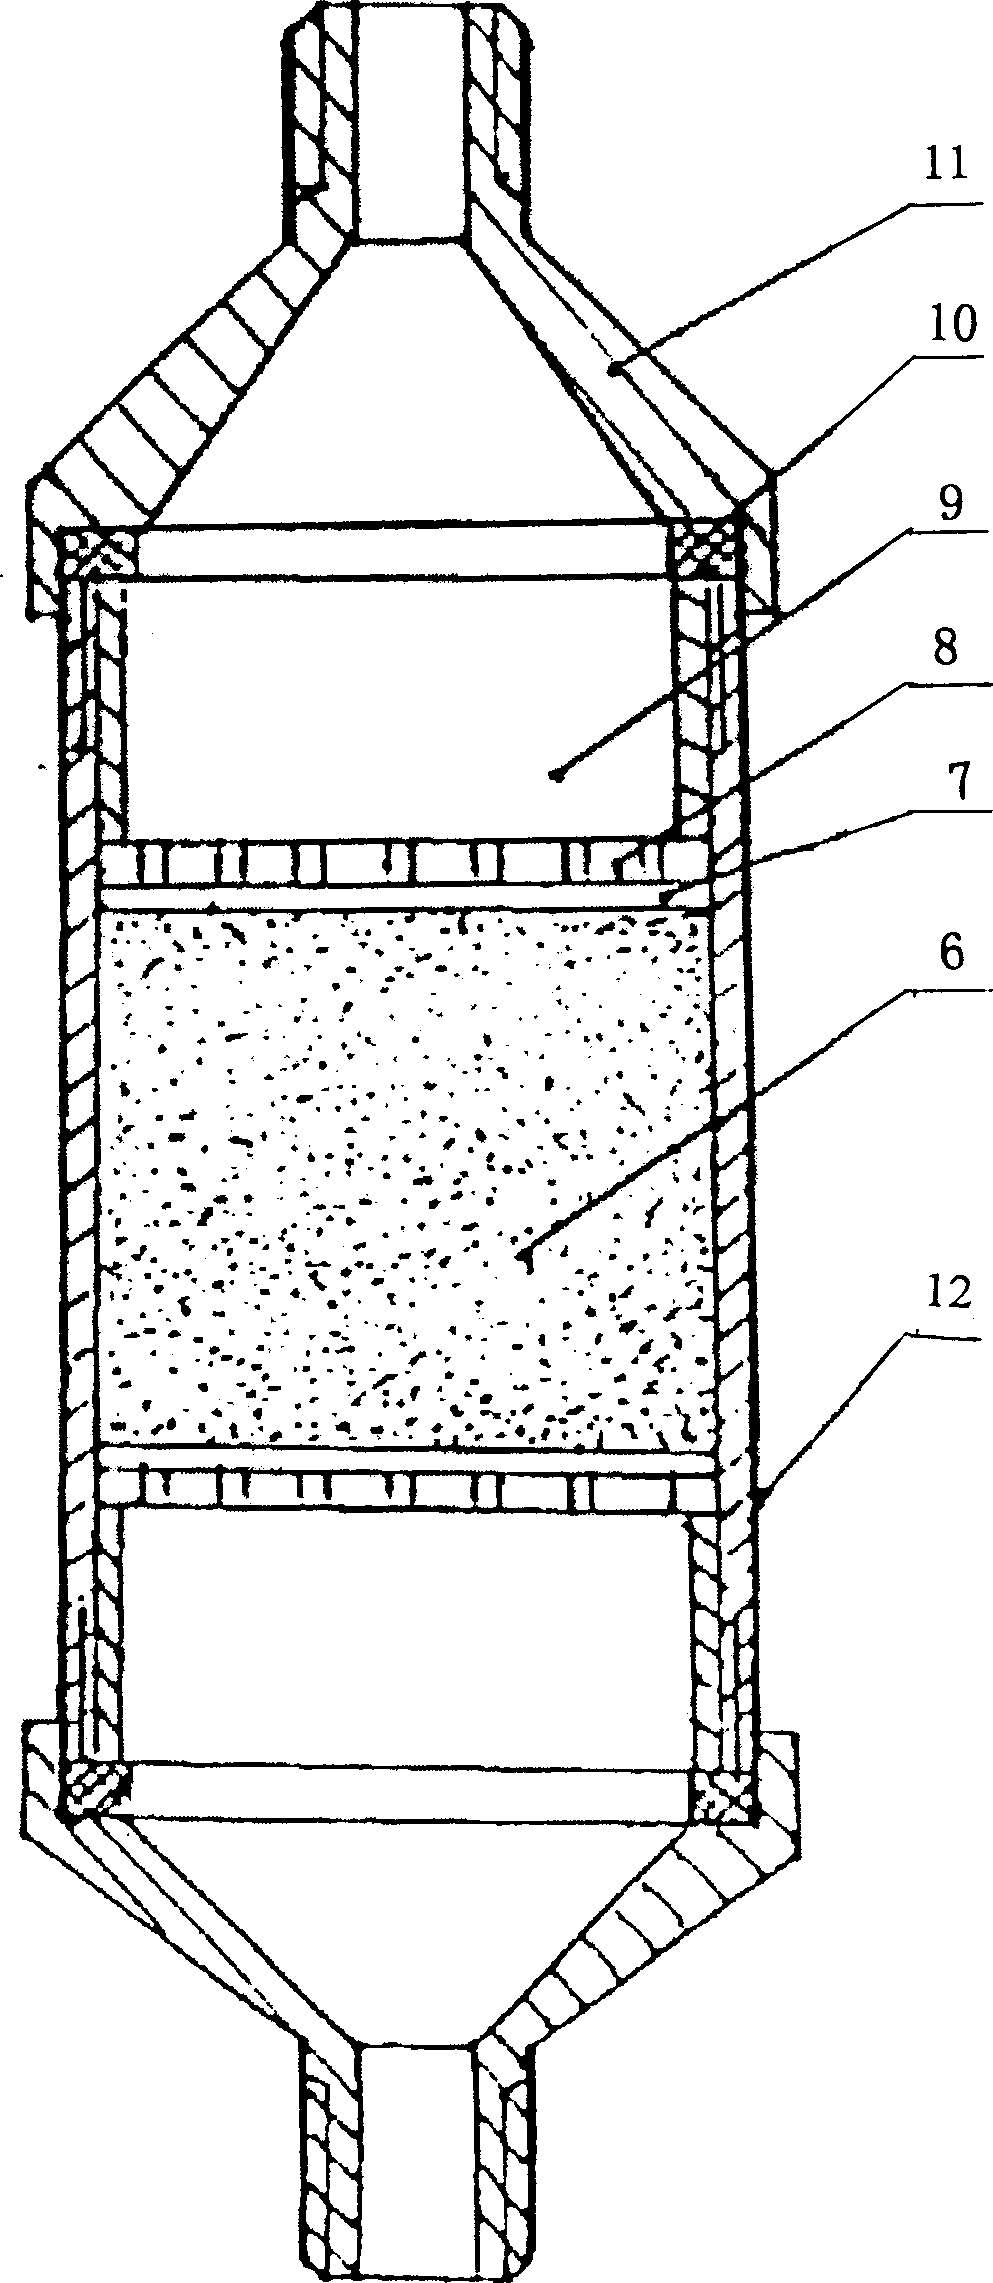 Circulating column experiment device for researching nuclein migration